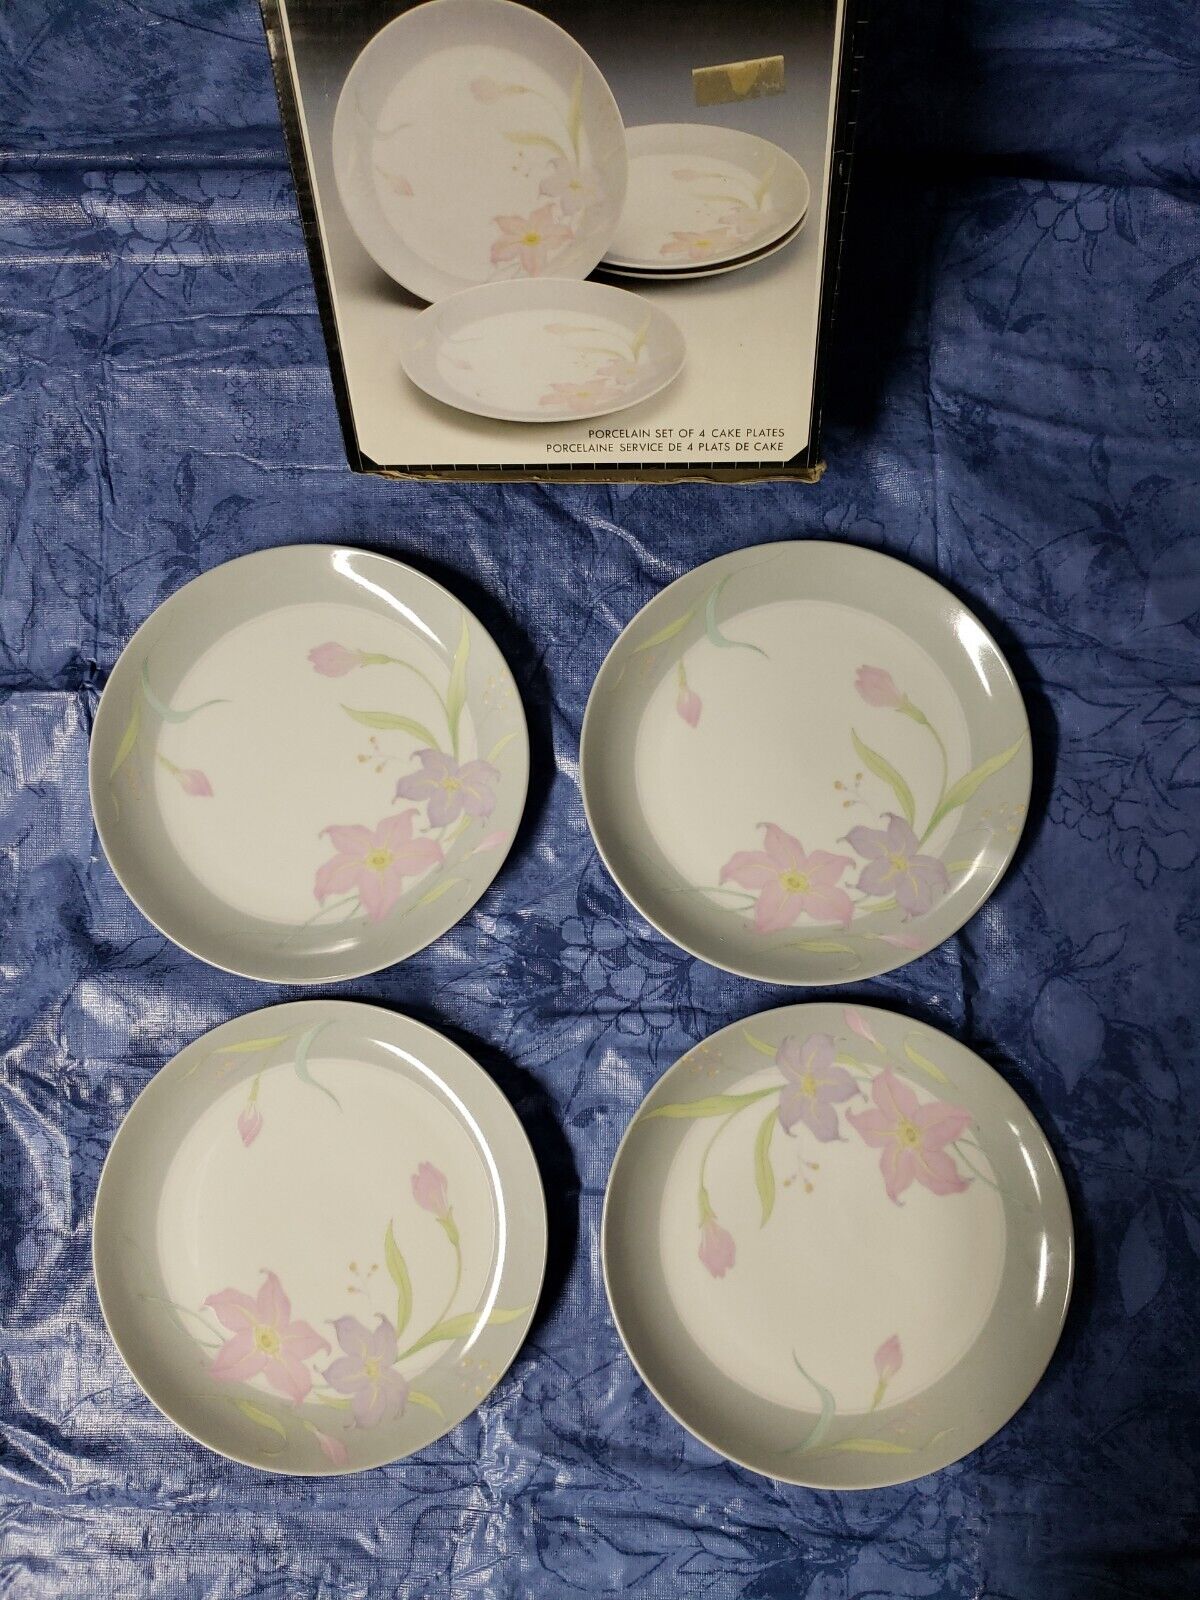 Vintage Remembrance Collection by Action, Japan set of 4 cake/dessert plates